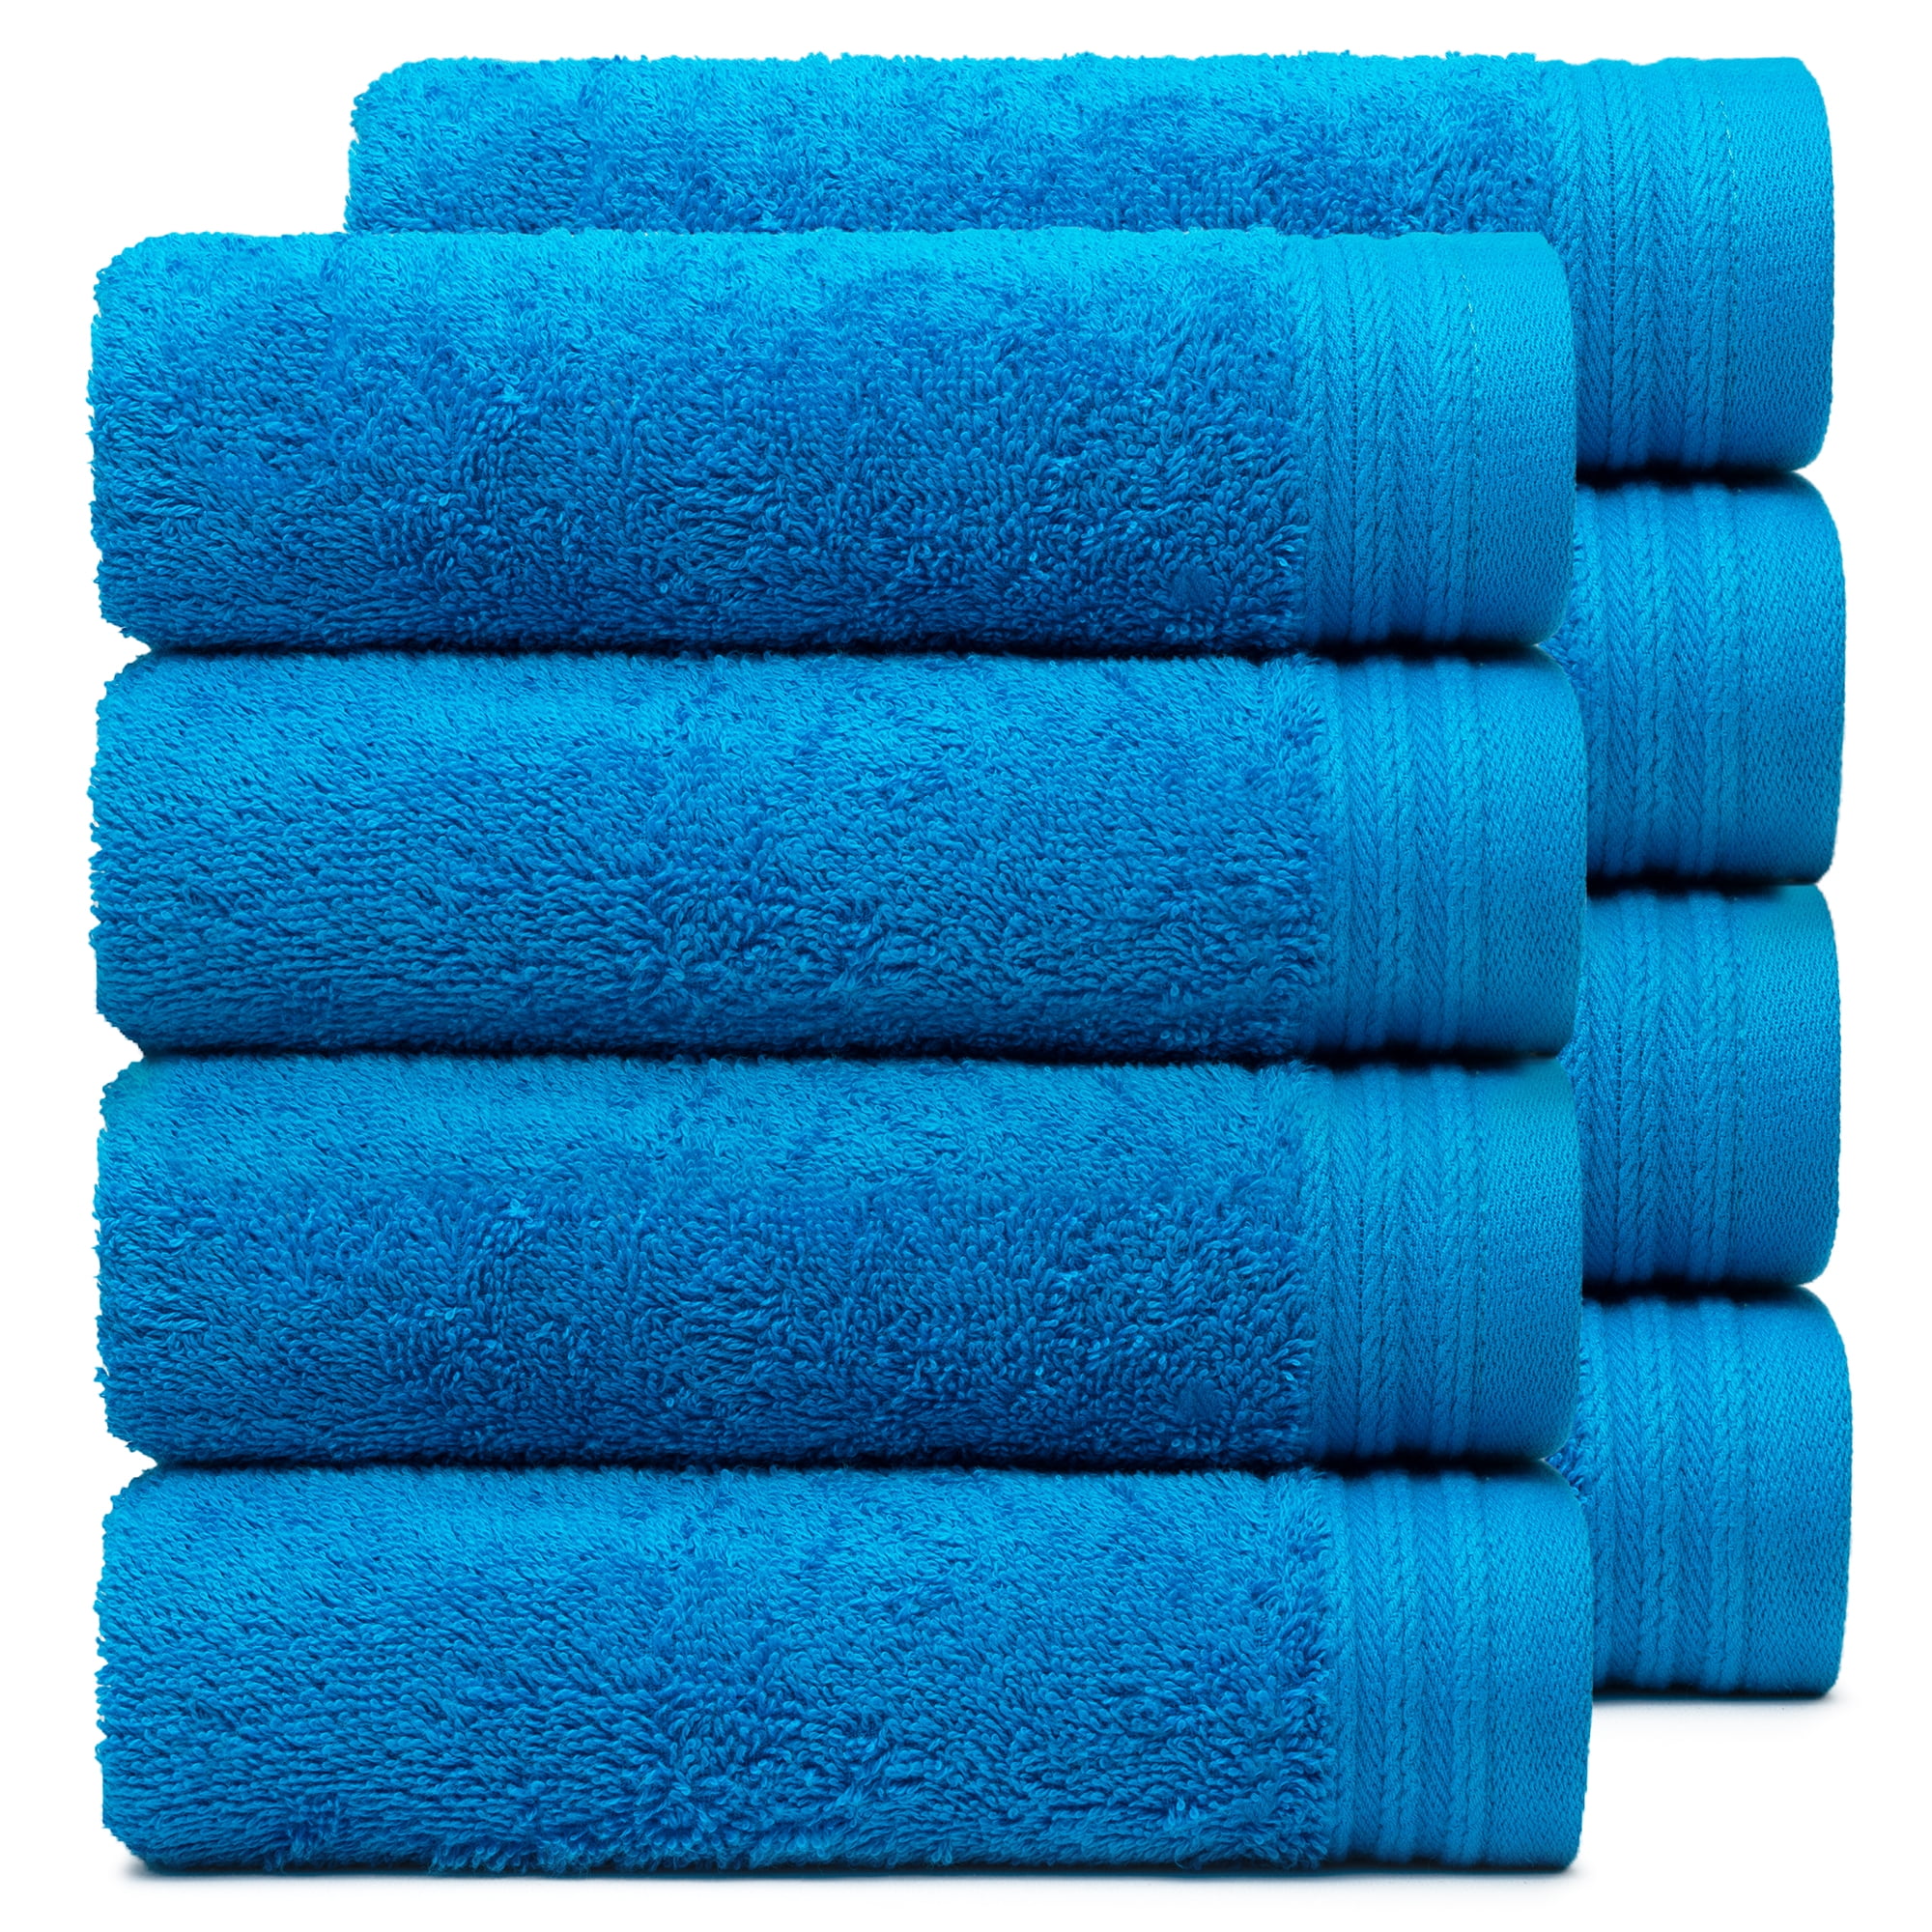 Martha Stewart Quick Dry Reversible Bath Towels Only $4.80 on